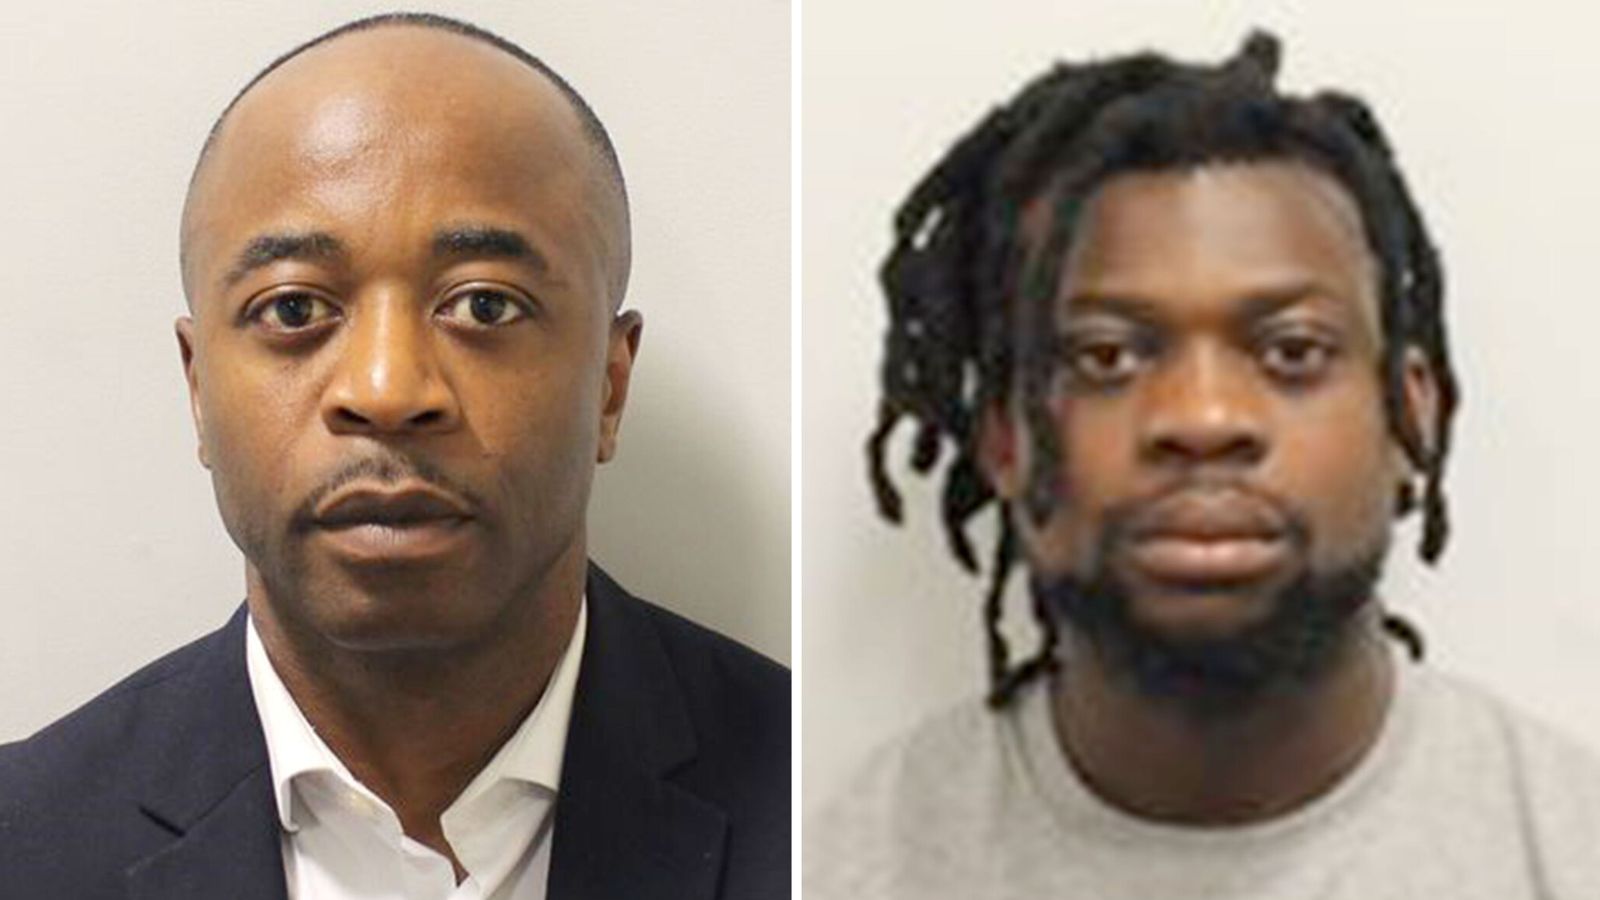 Two men jailed for raping girl, 16, in north London